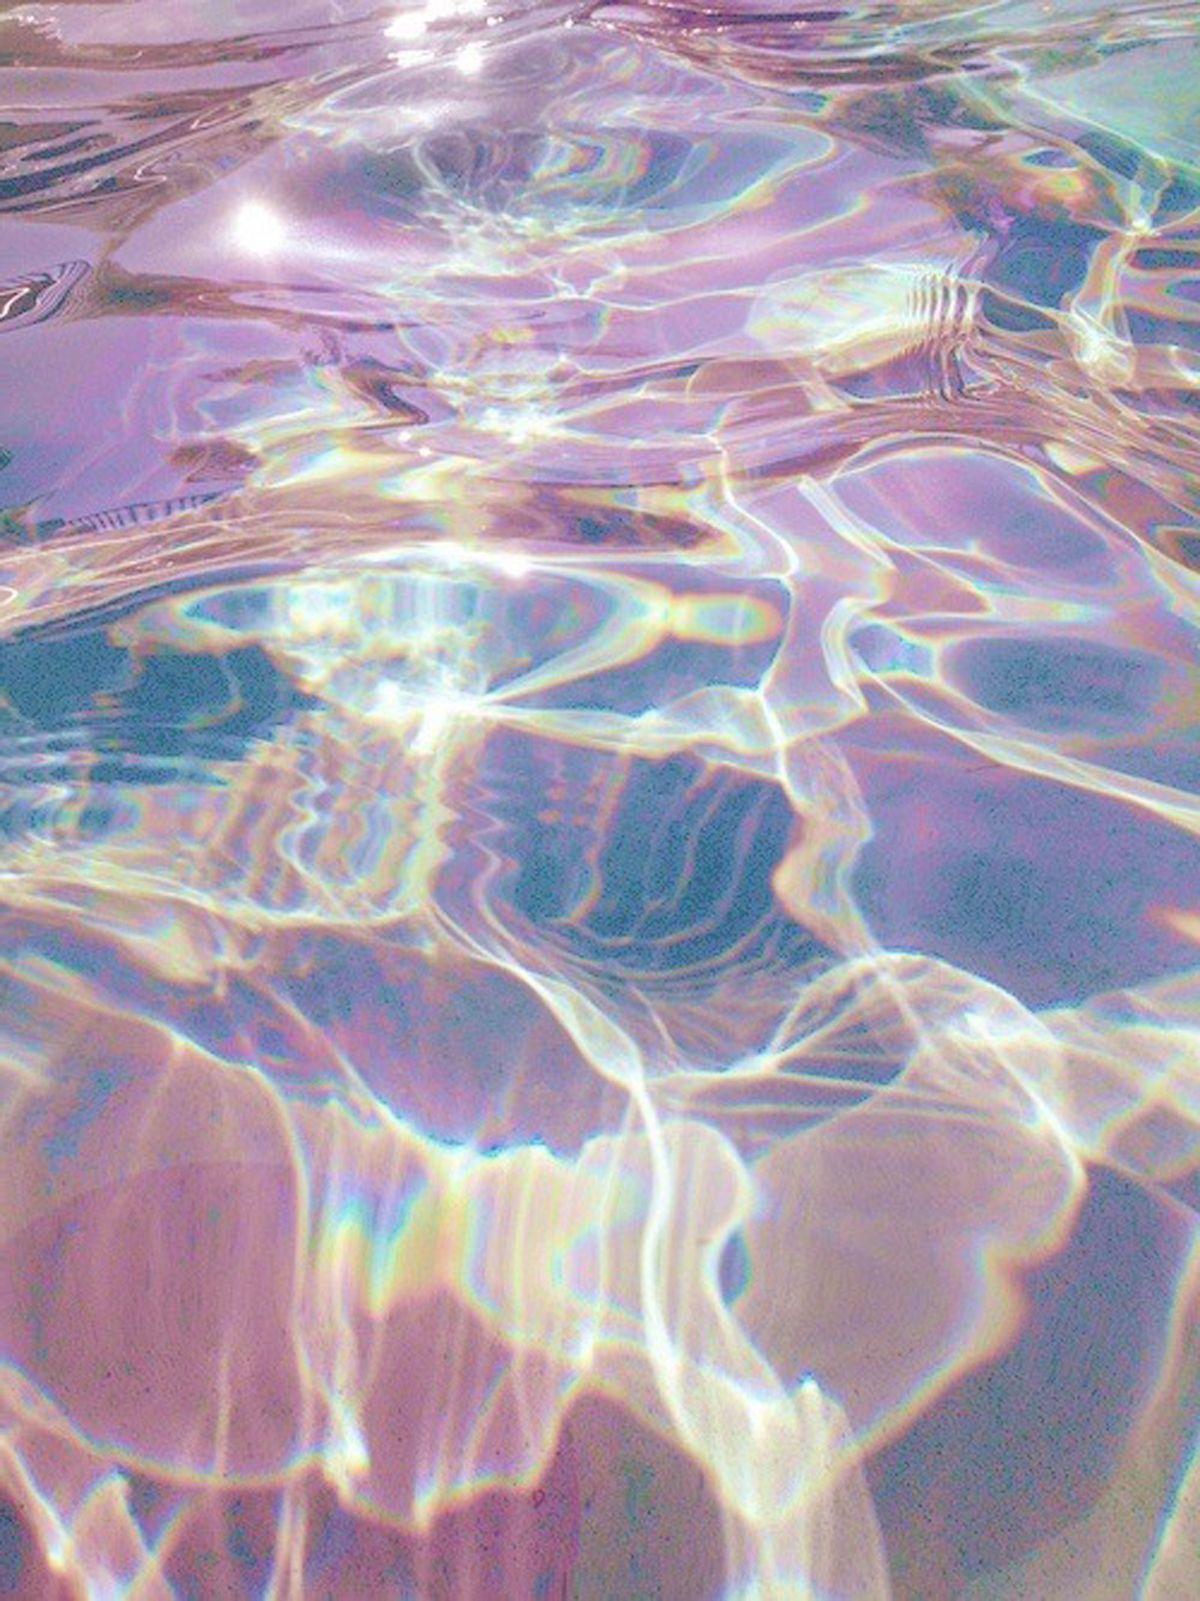 The water is reflecting the sunlight in the pool - Iridescent